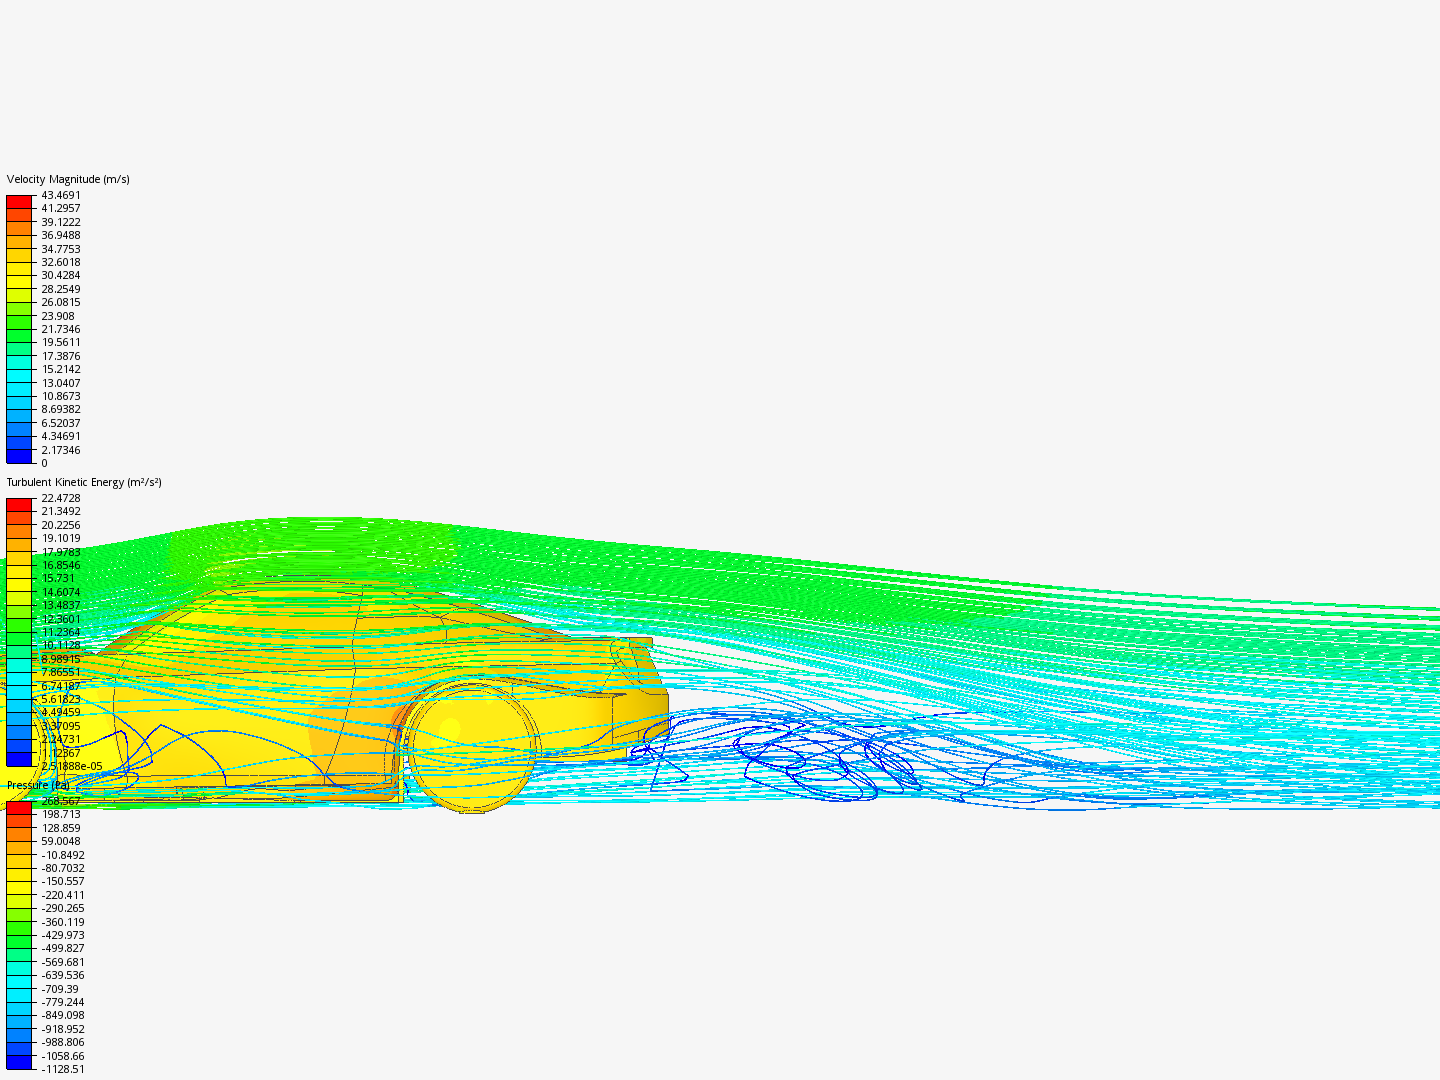 Incompressible CFD simulation over a vehicle image